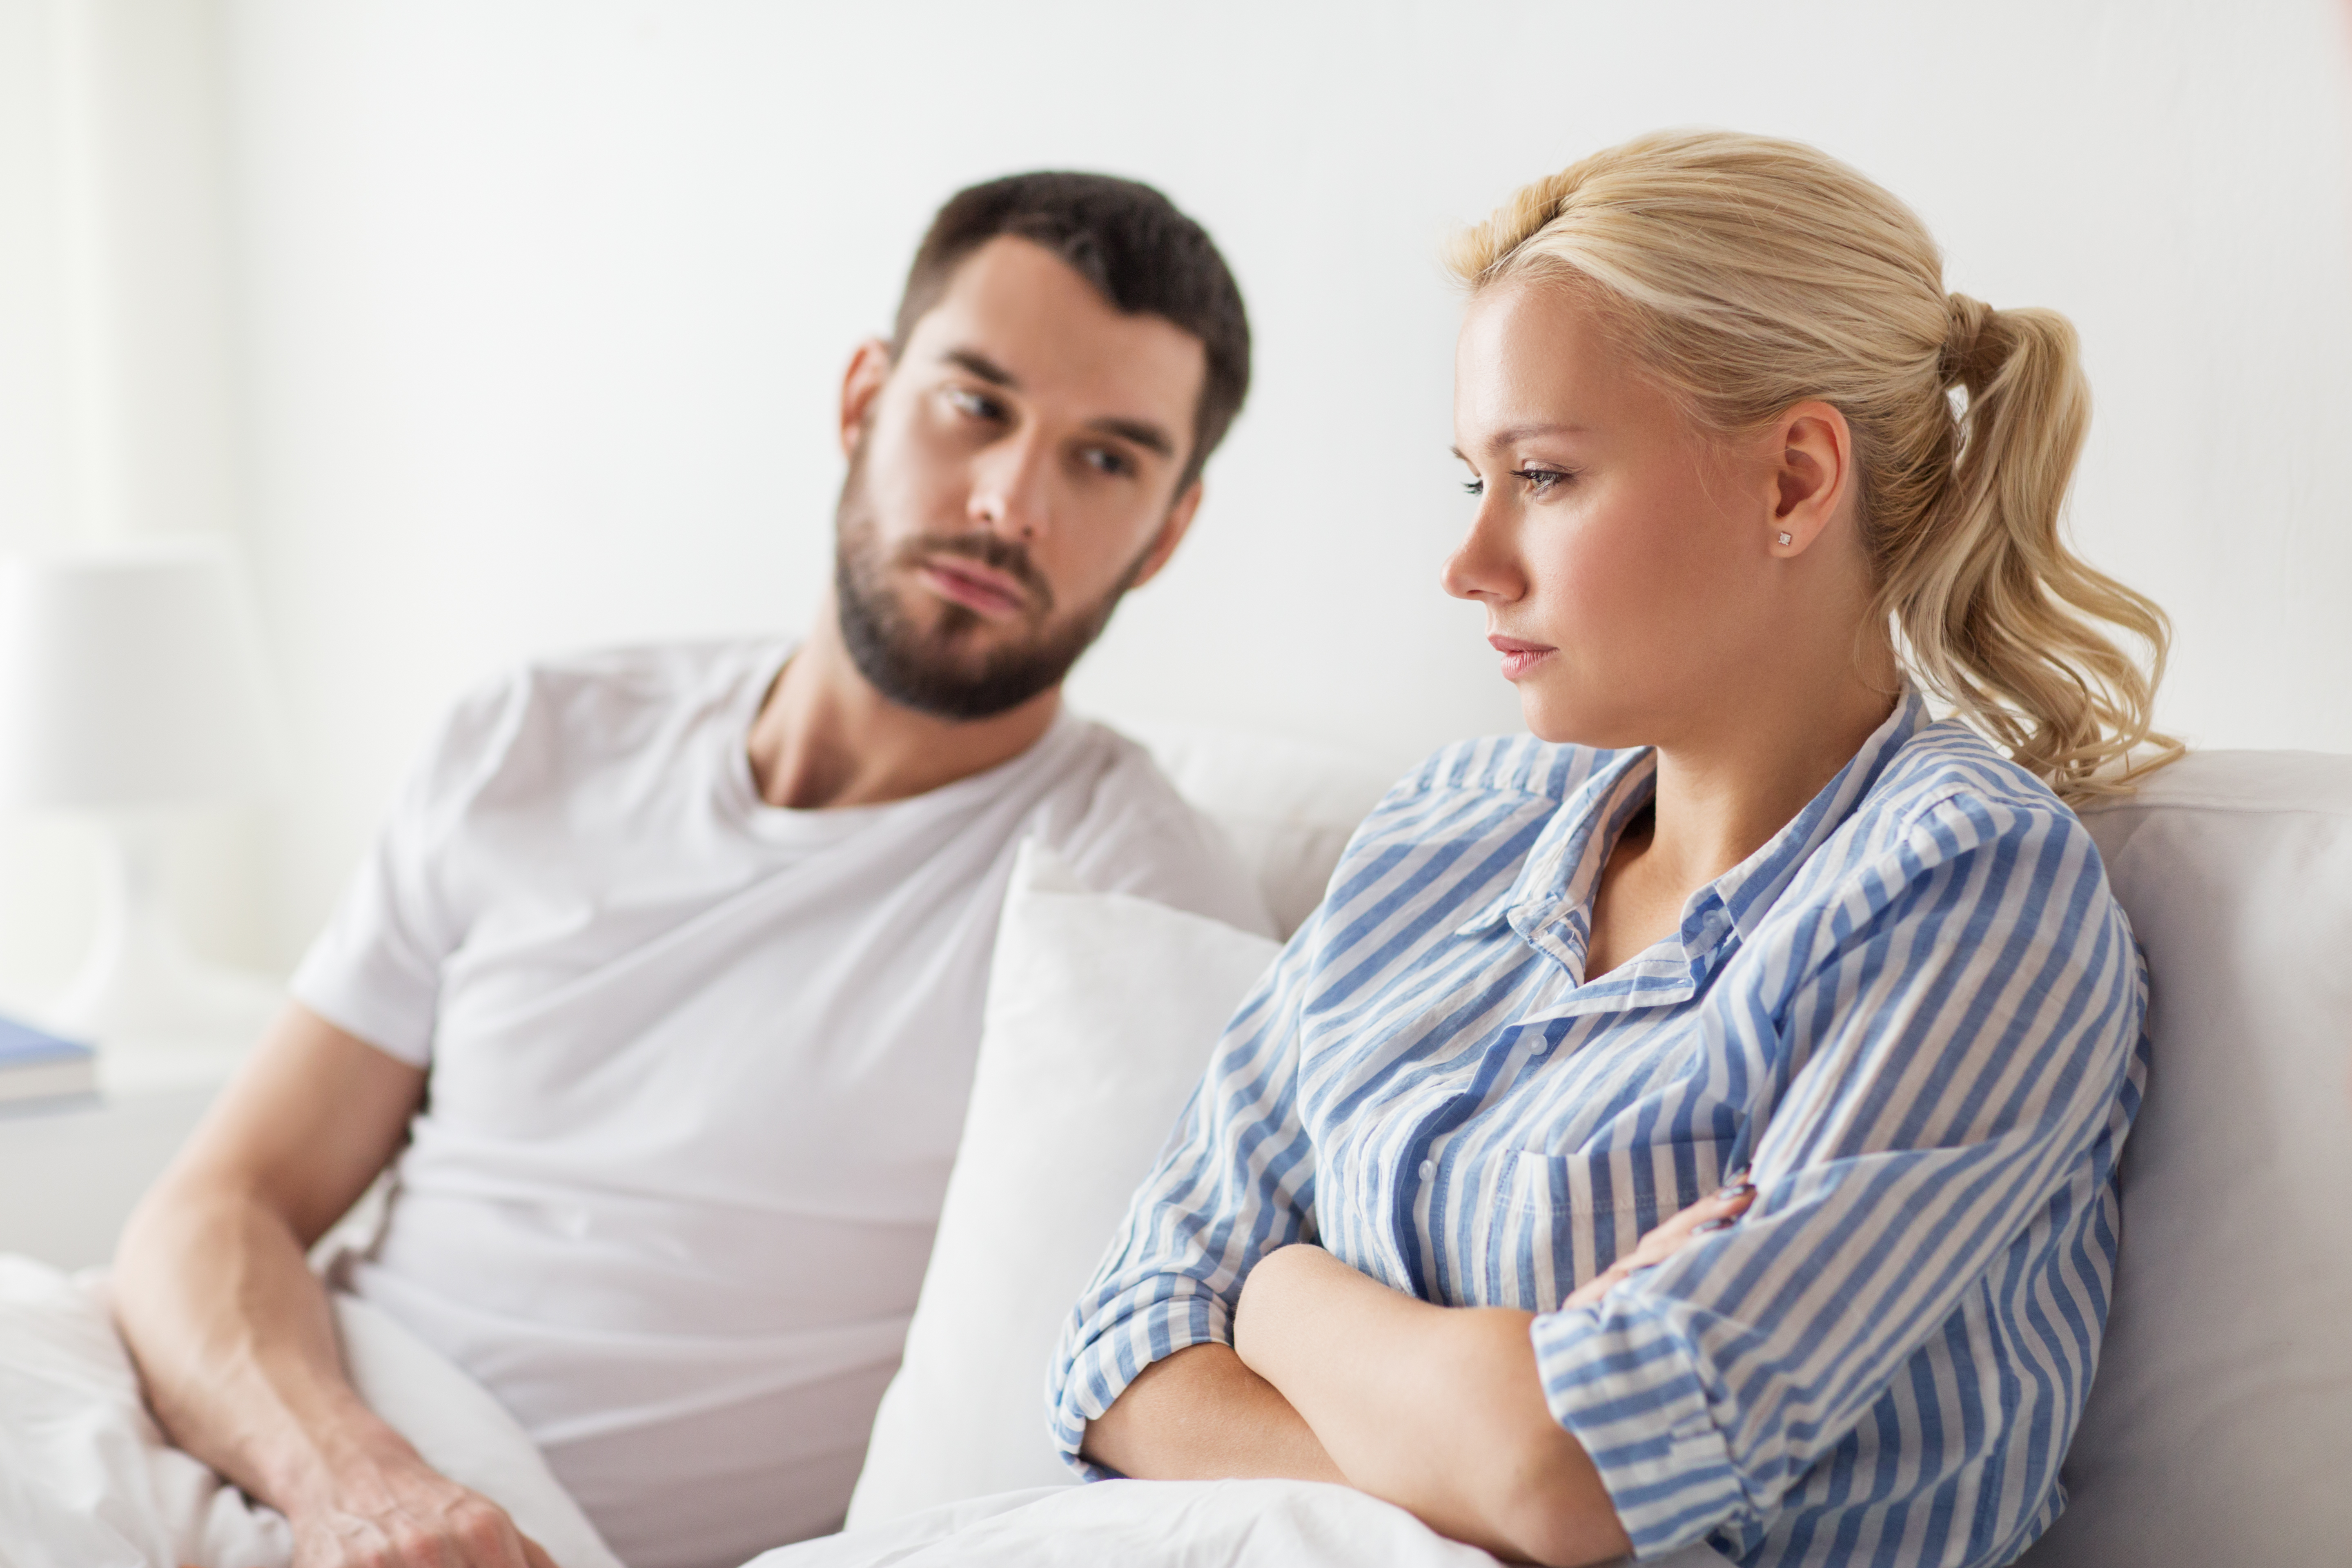 An upset woman with an apologetic looking man seated beside her | Source: Shutterstock